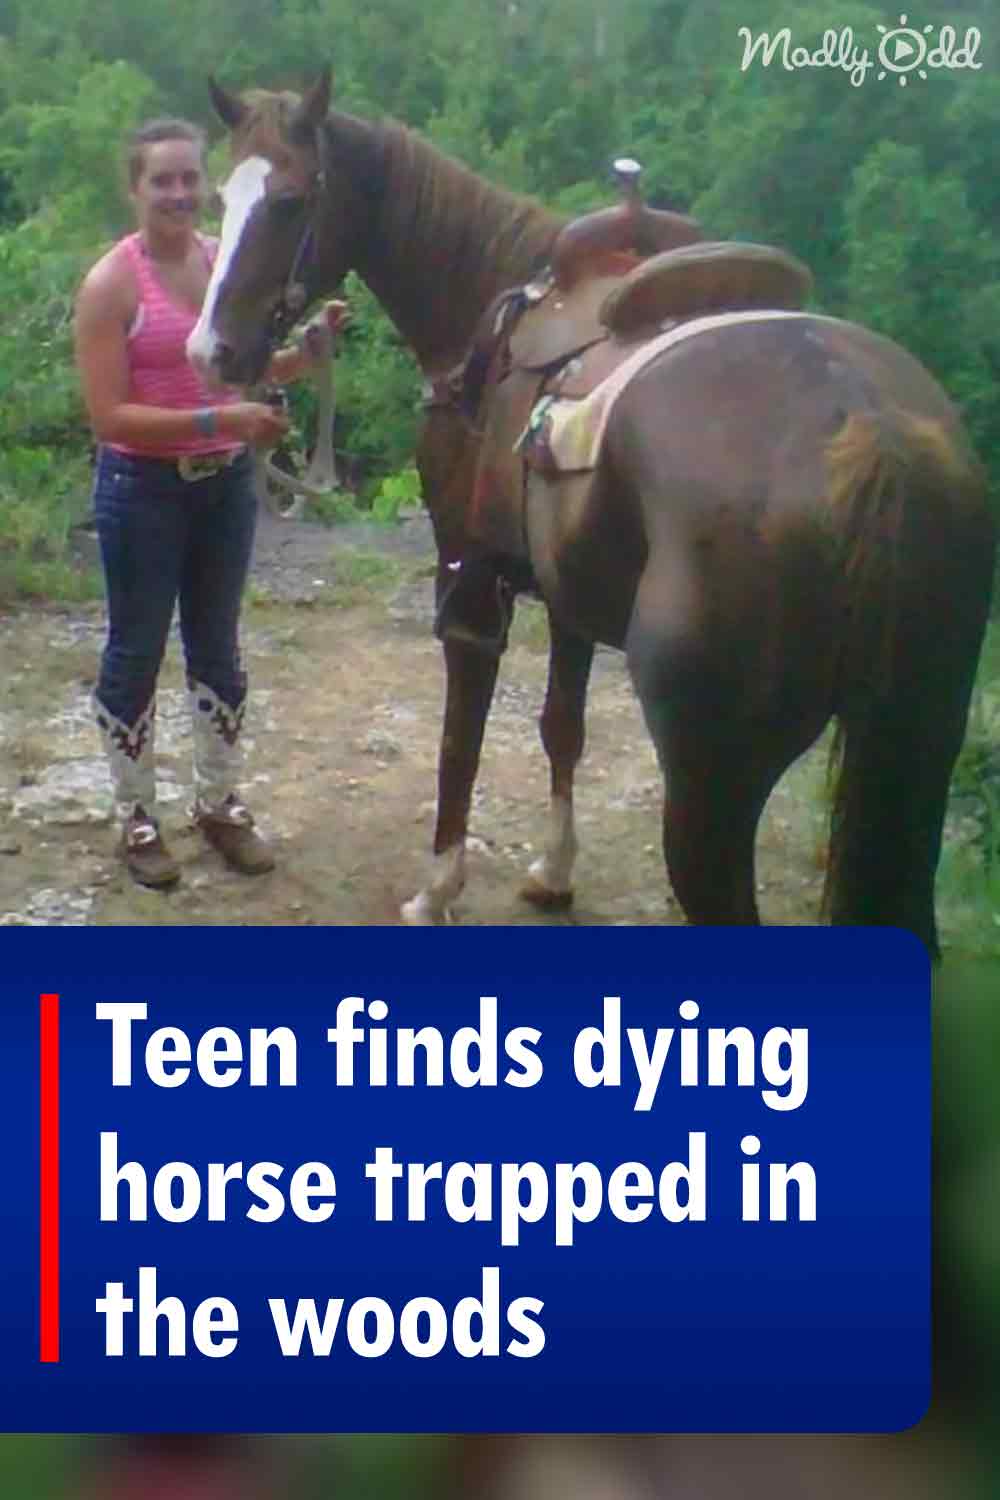 Teen finds dying horse trapped in the woods